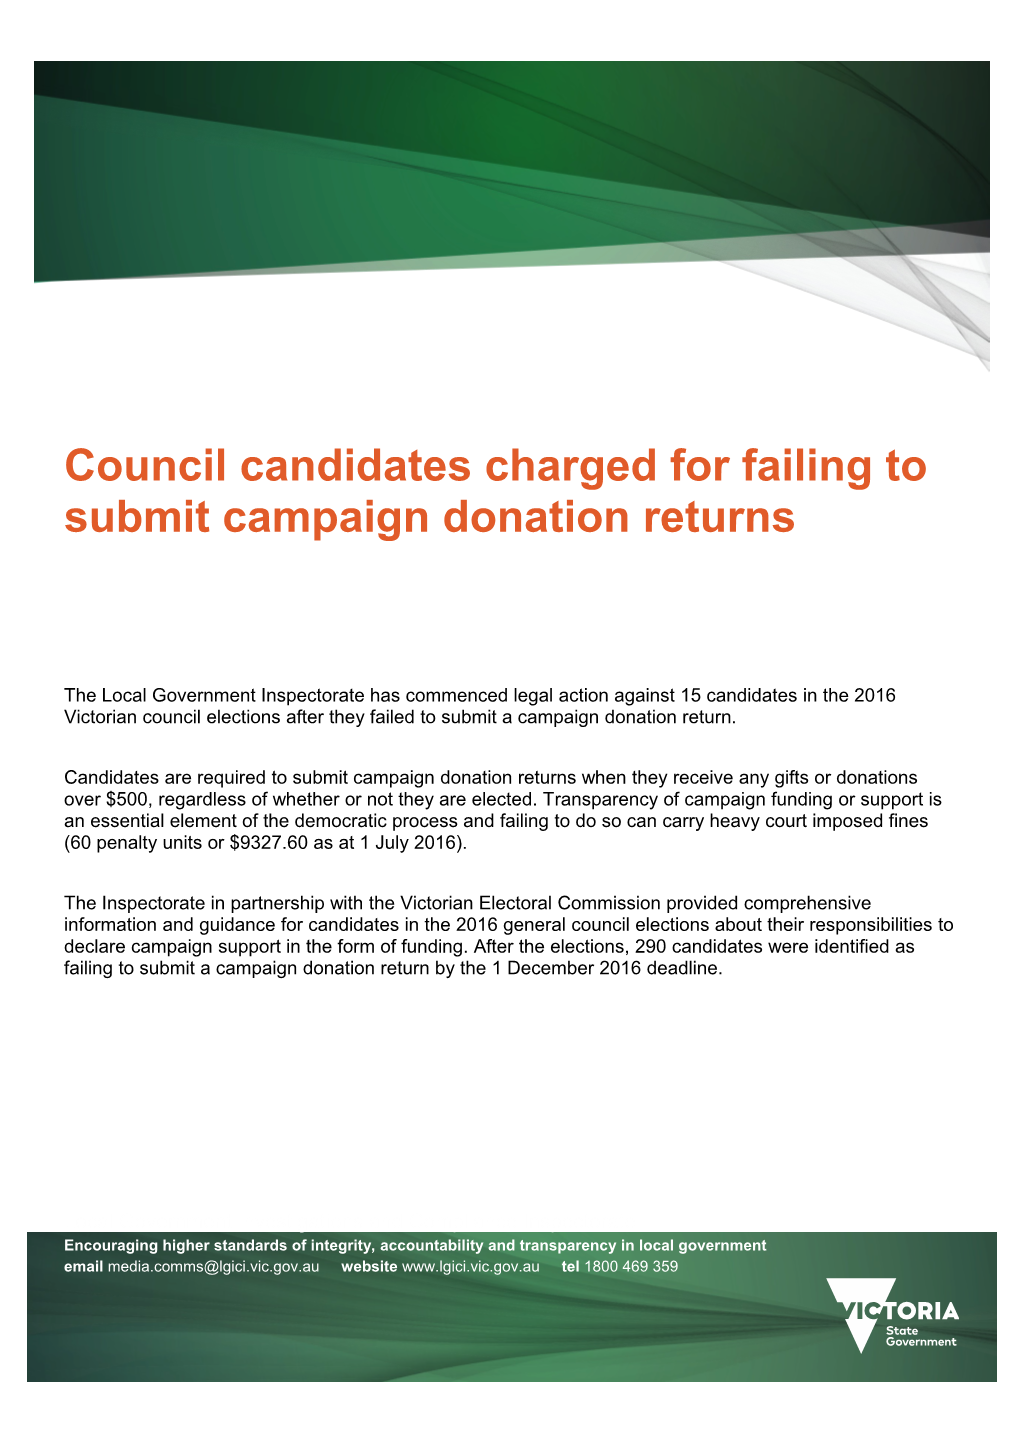 The Local Government Inspectorate Has Commenced Legal Action Against 15 Candidates in The